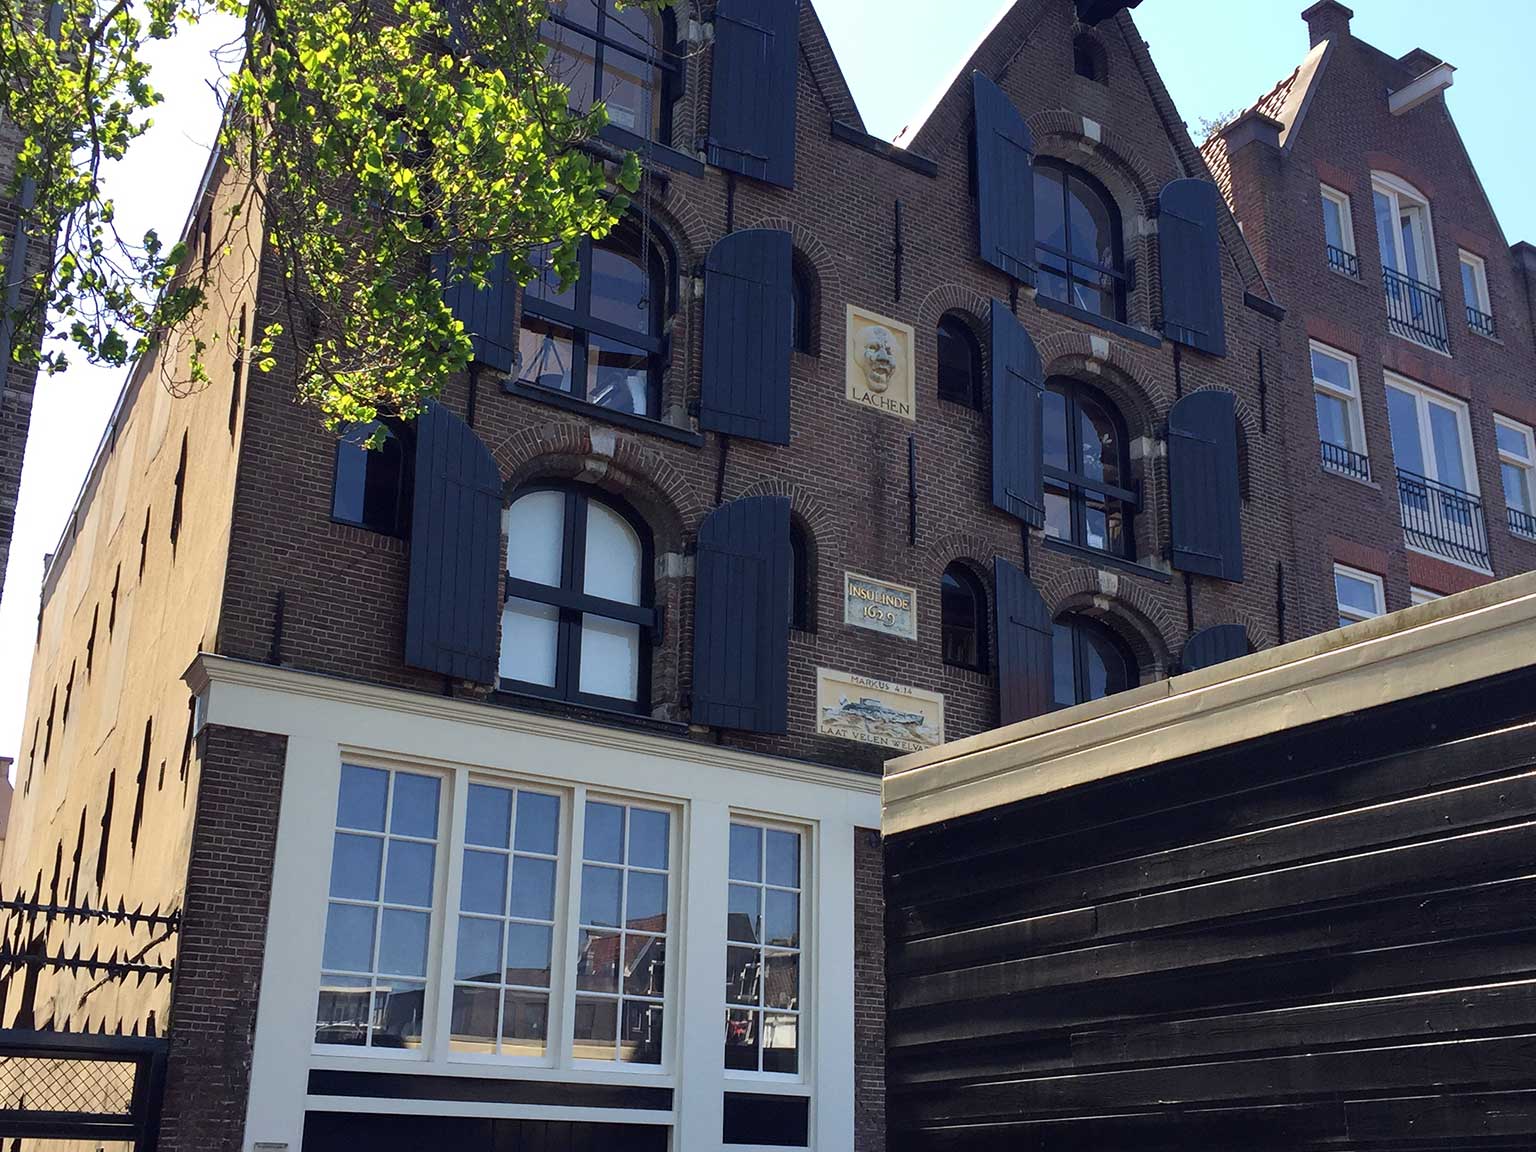 Prinseneiland 49-51, Amsterdam, renovated warehouses from 1629 with three modern gable stones